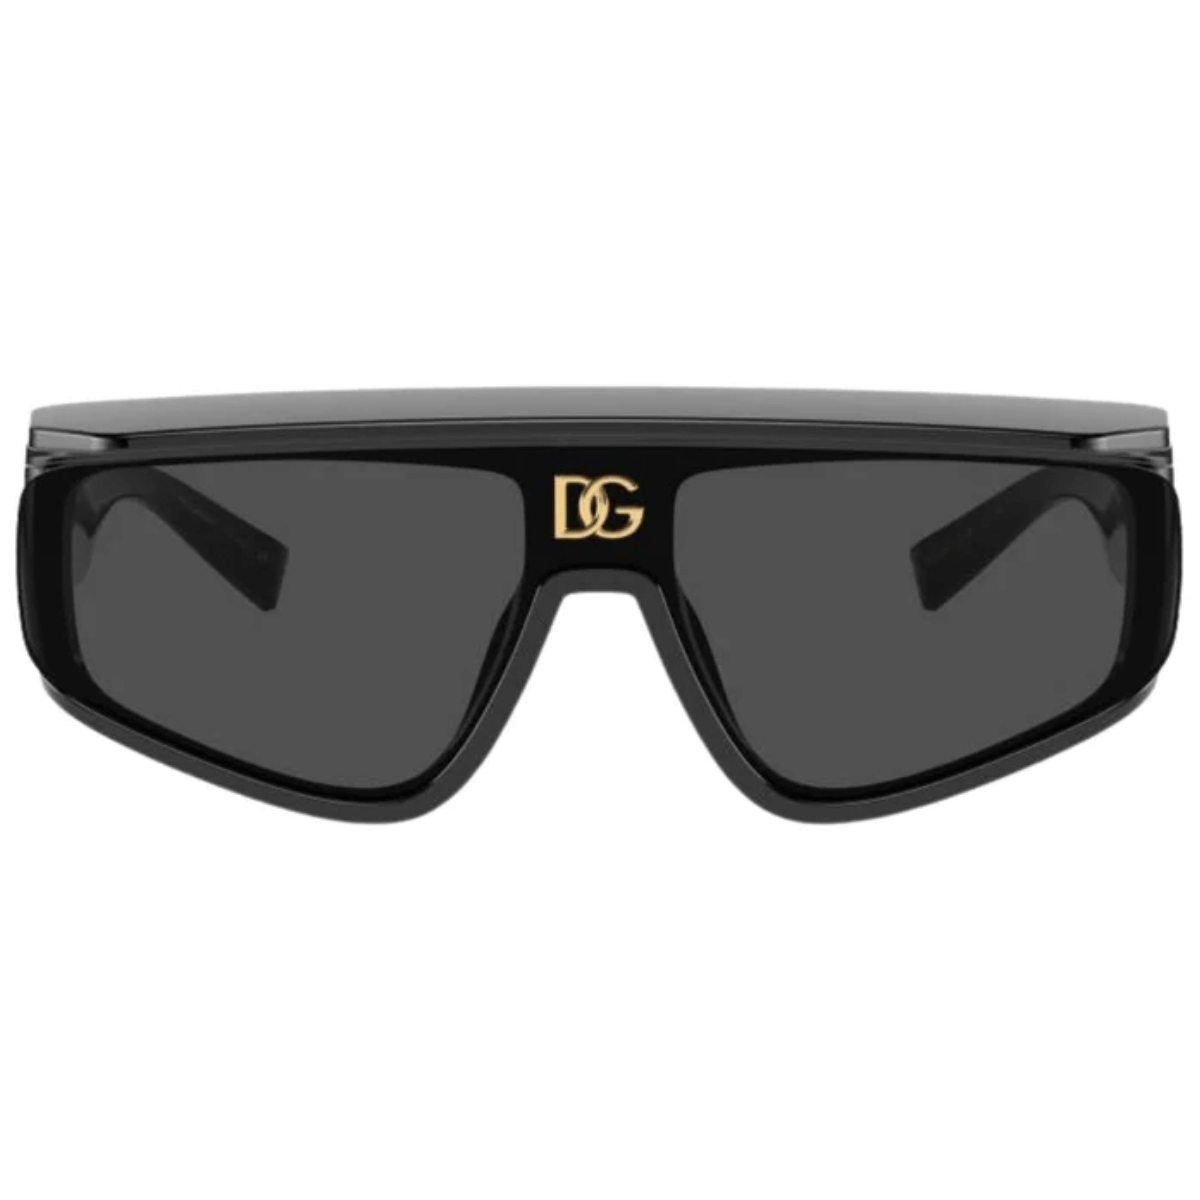 4. "Upgrade your style with the sleek Dolce & Gabbana DG6177 501/87 Sunglasses in Black for men, available at Optorium. Stay cool and fashionable with these branded shades perfect for any occasion."